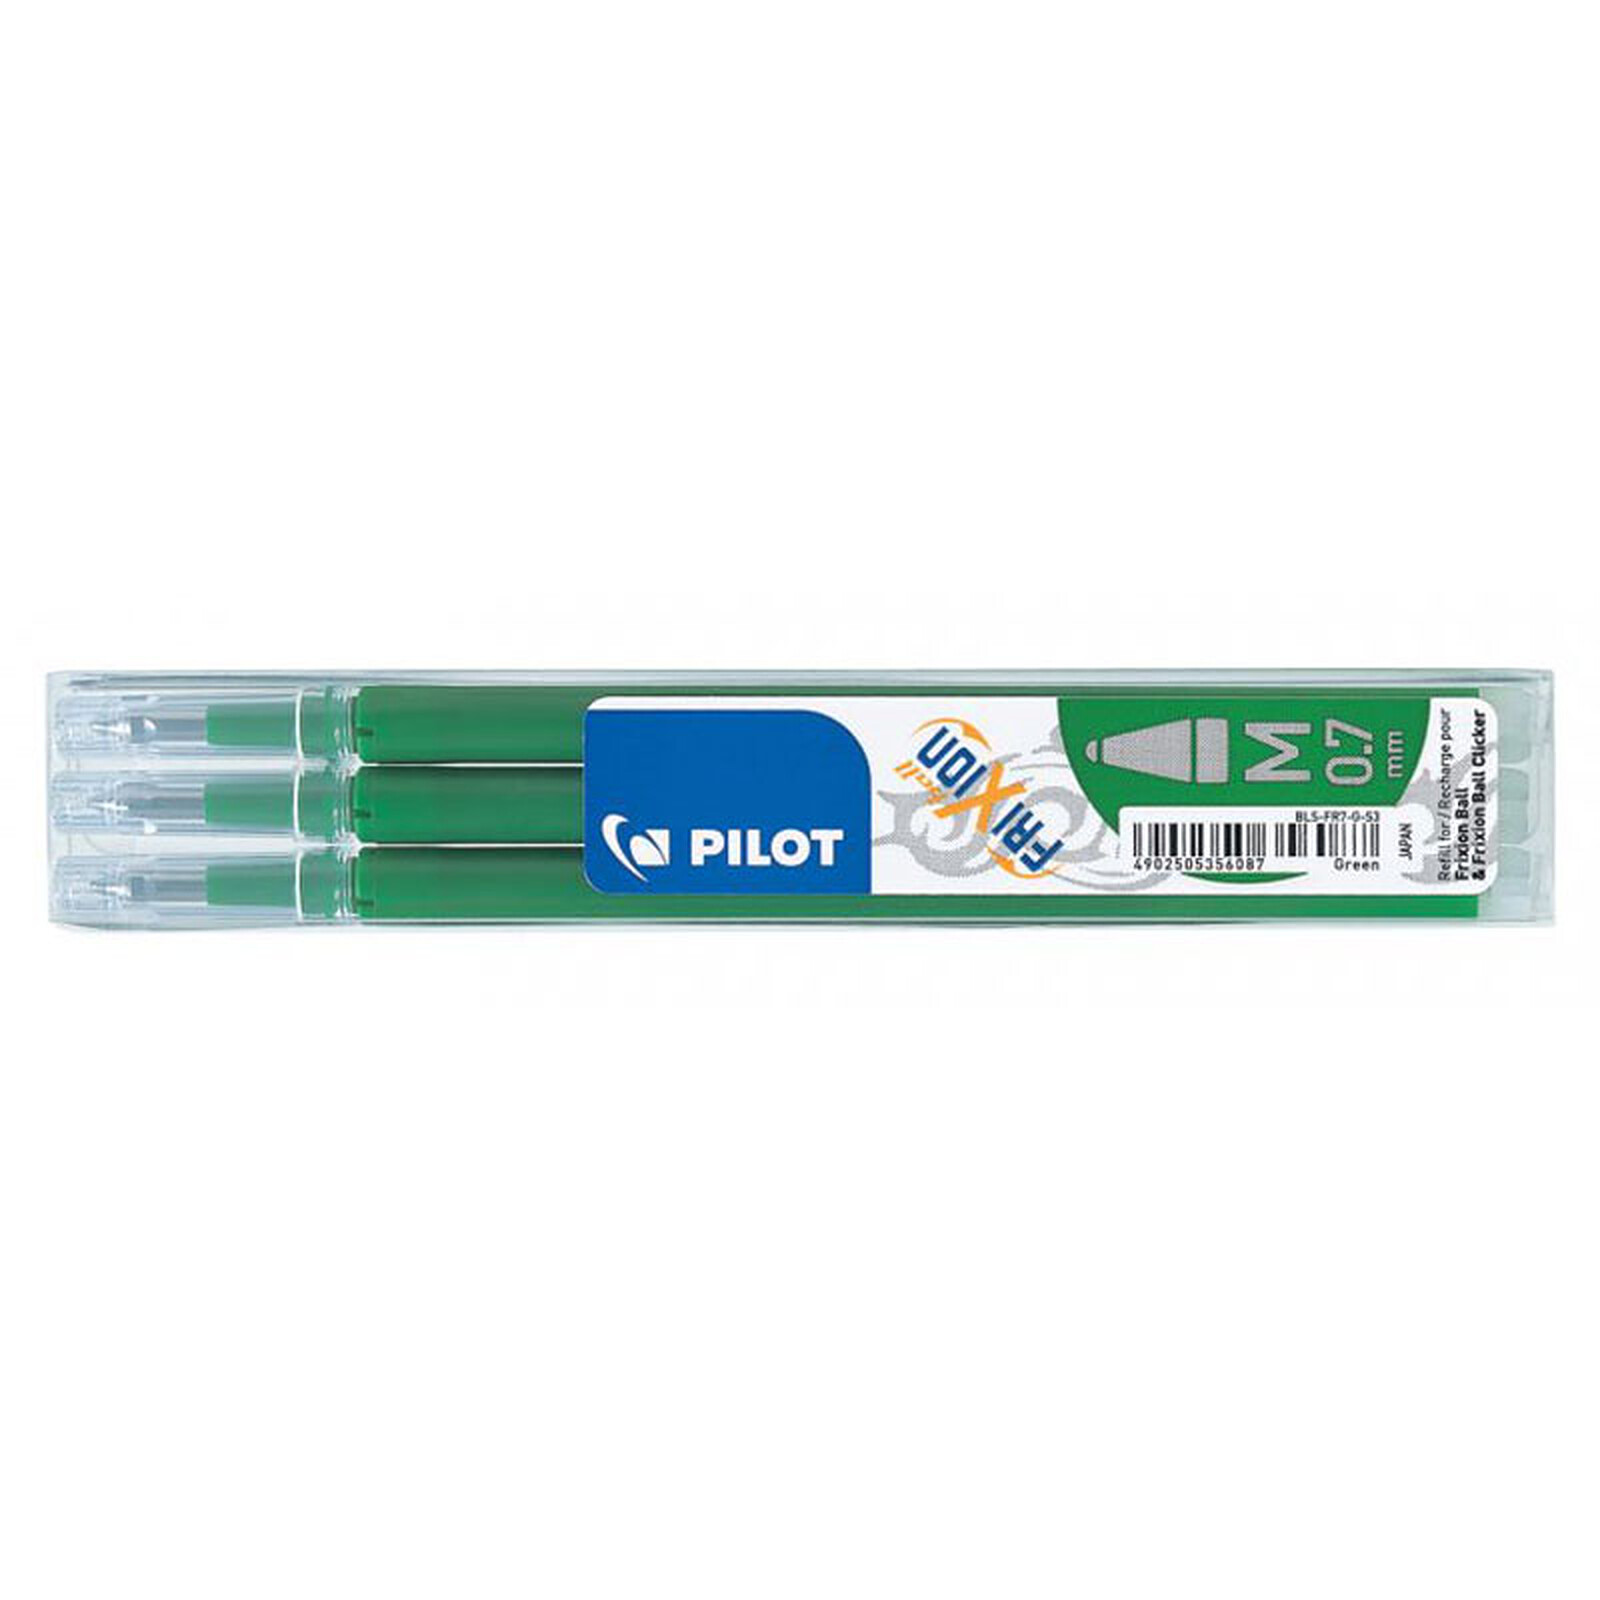 PILOT Recharges pour FriXion Ball Vert pointe 0,7mm - Stylo